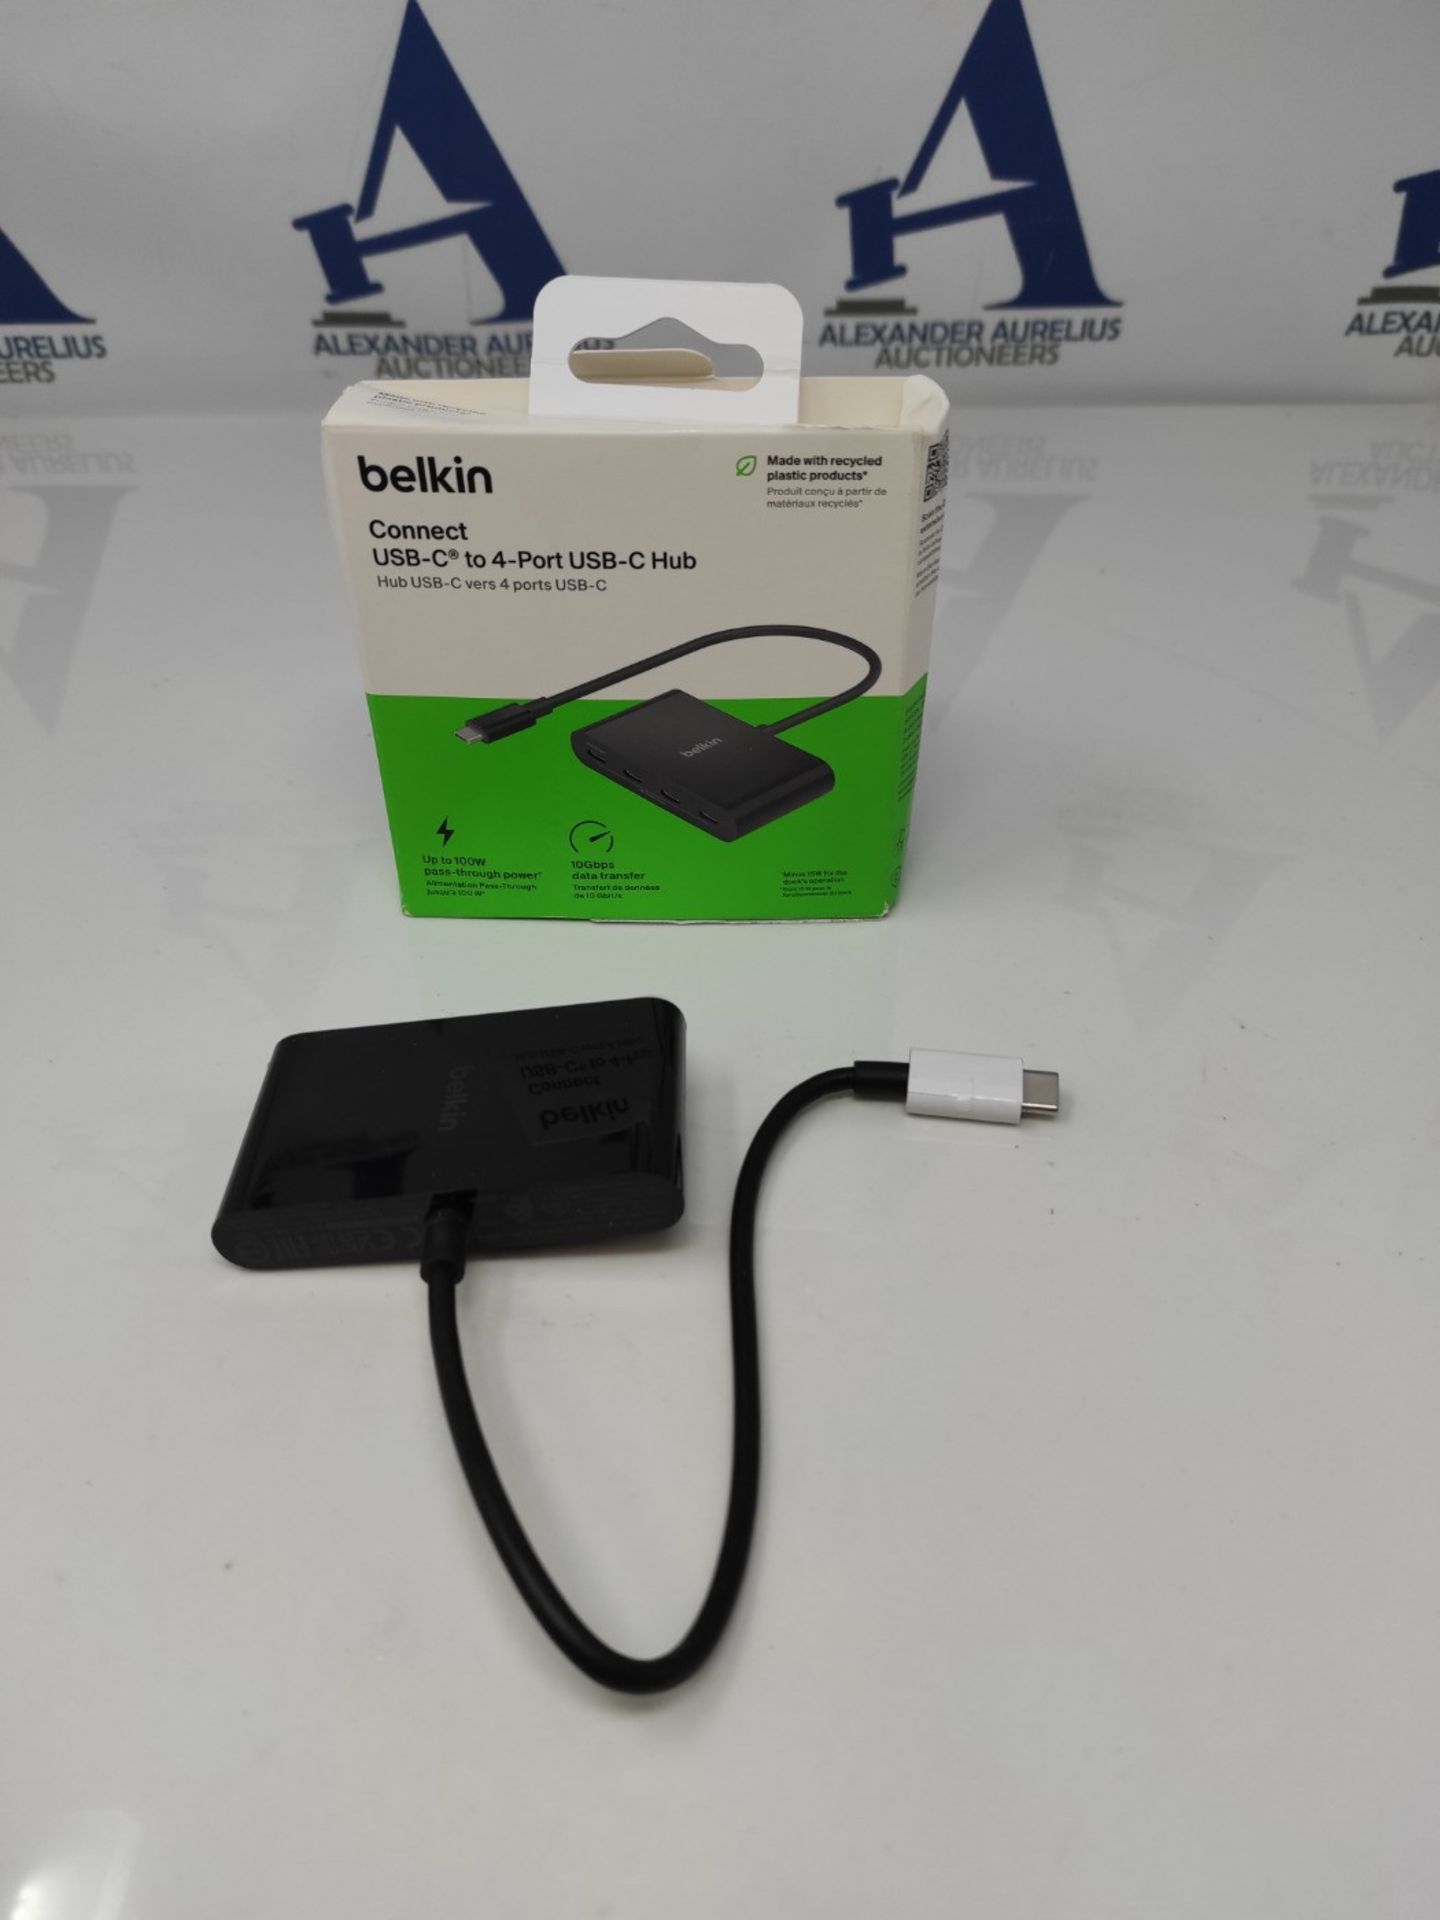 Belkin CONNECT USB-C"! to 4-Port USB-C Hub, Multiport Adapter Dongle with 4 USB-C 3.2 - Bild 2 aus 2